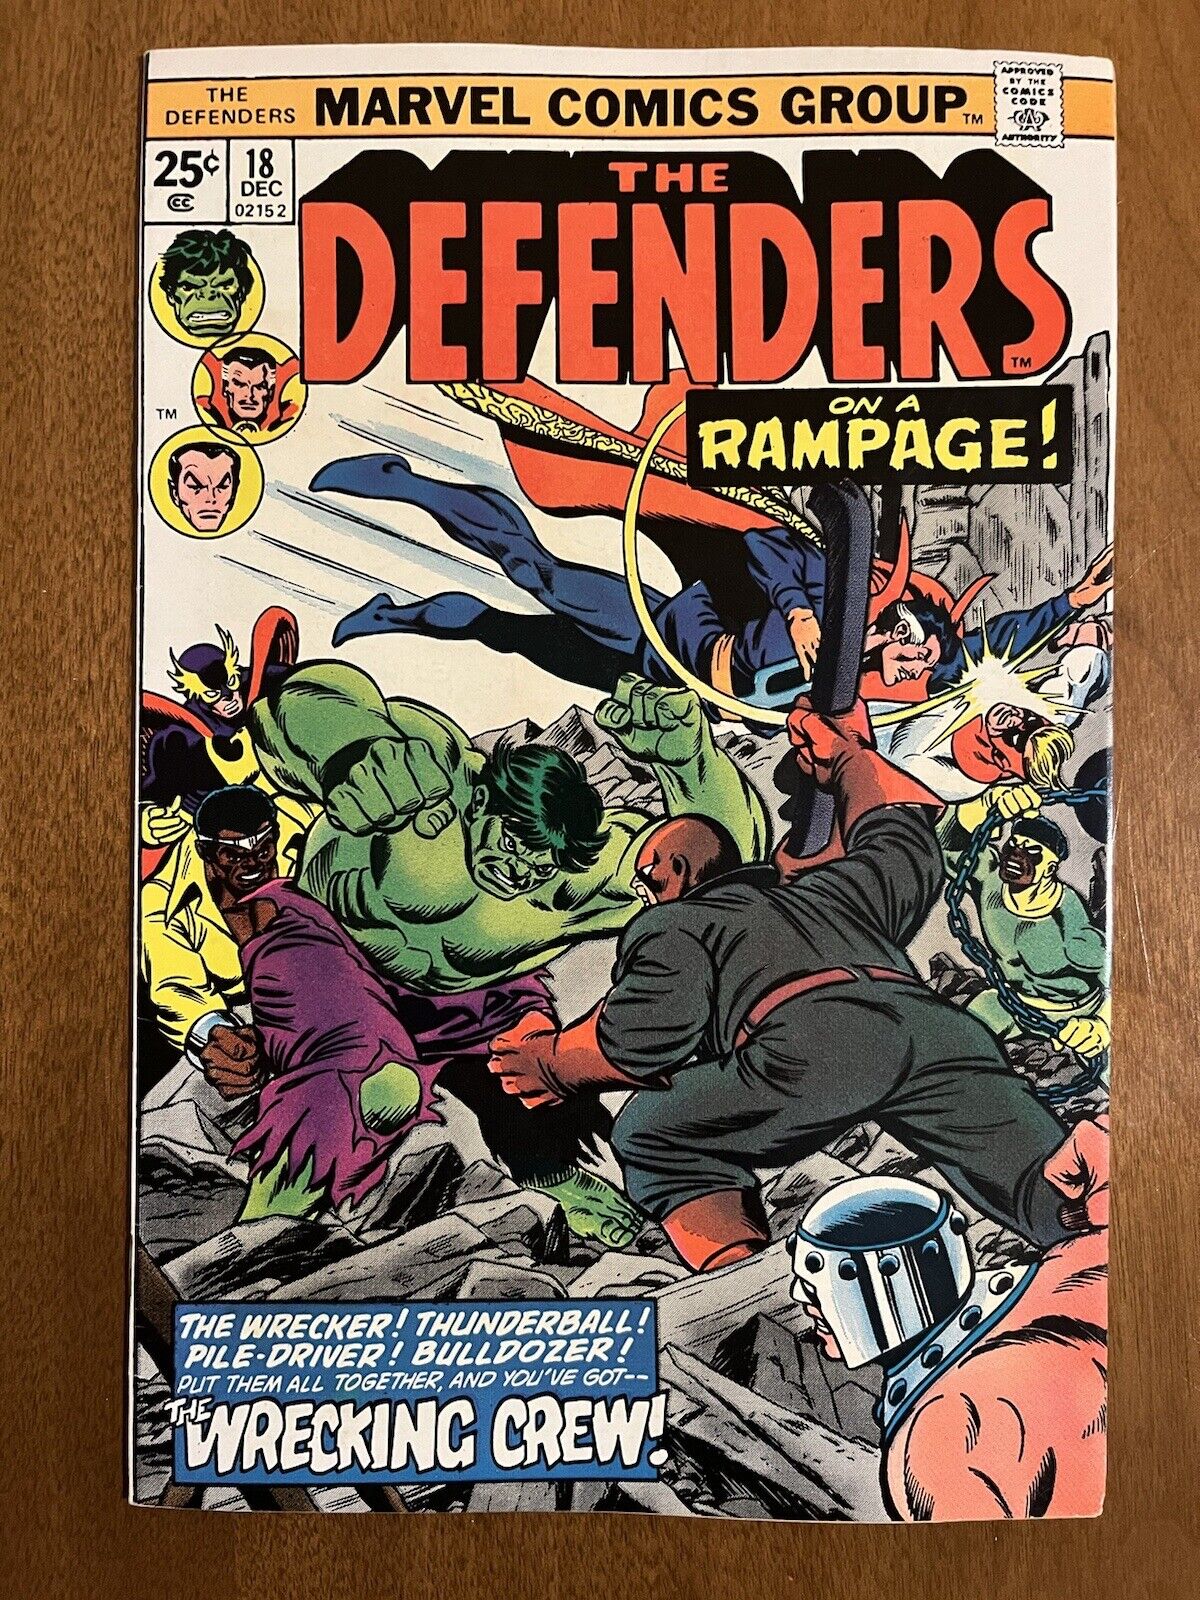 The Defenders #18/Bronze Age Marvel Comic Book/1st Full Wrecking Crew/VF-